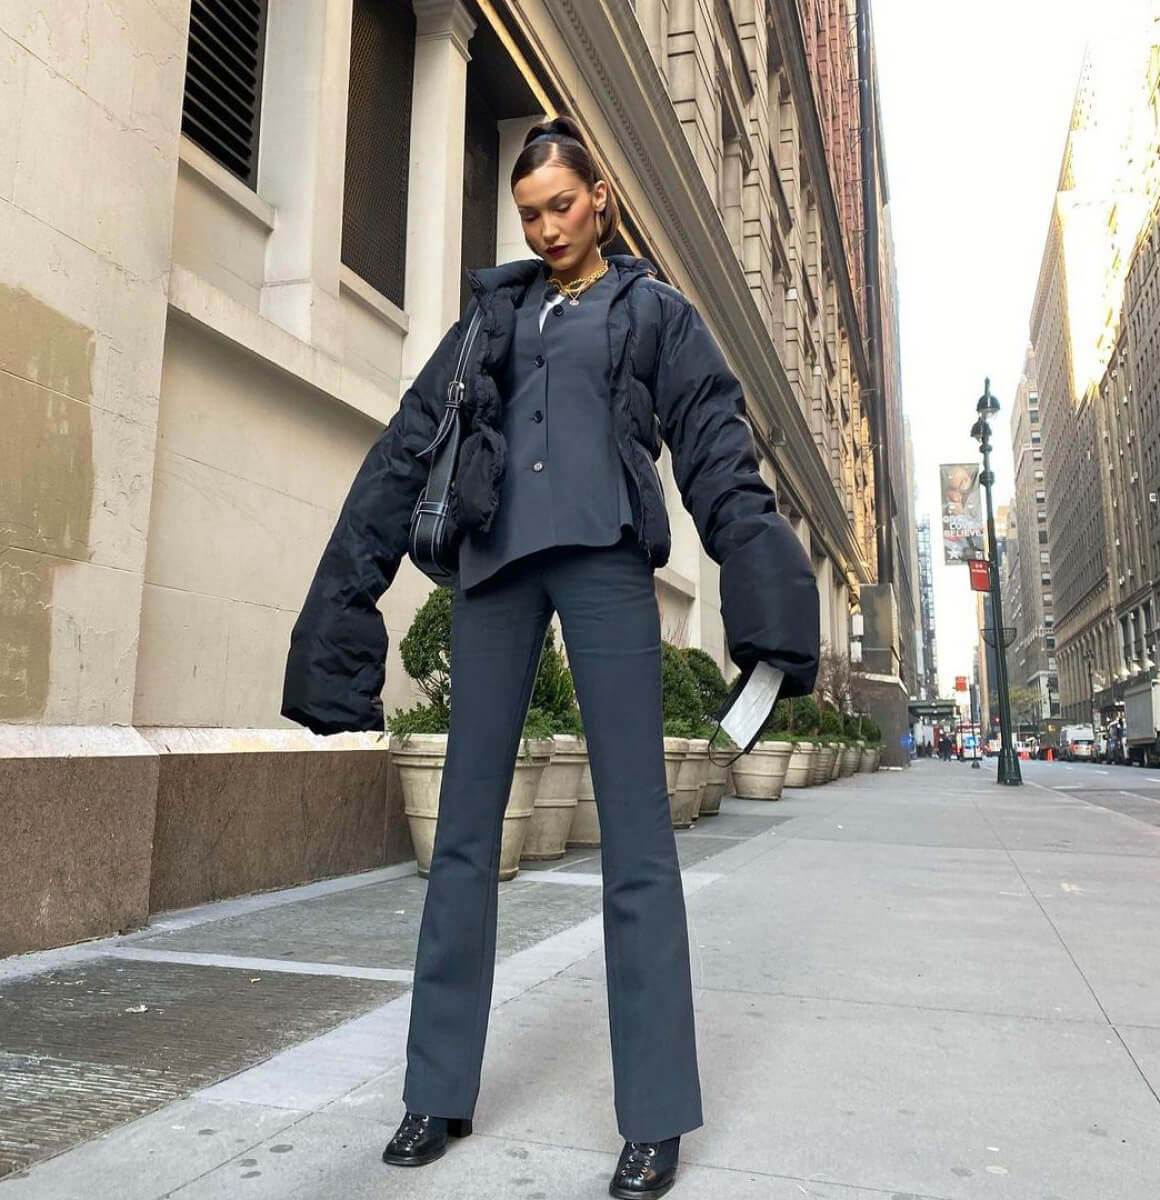 Bella Hadid in Fully Black Outfit - Instagram Photos 12/04/2020 1